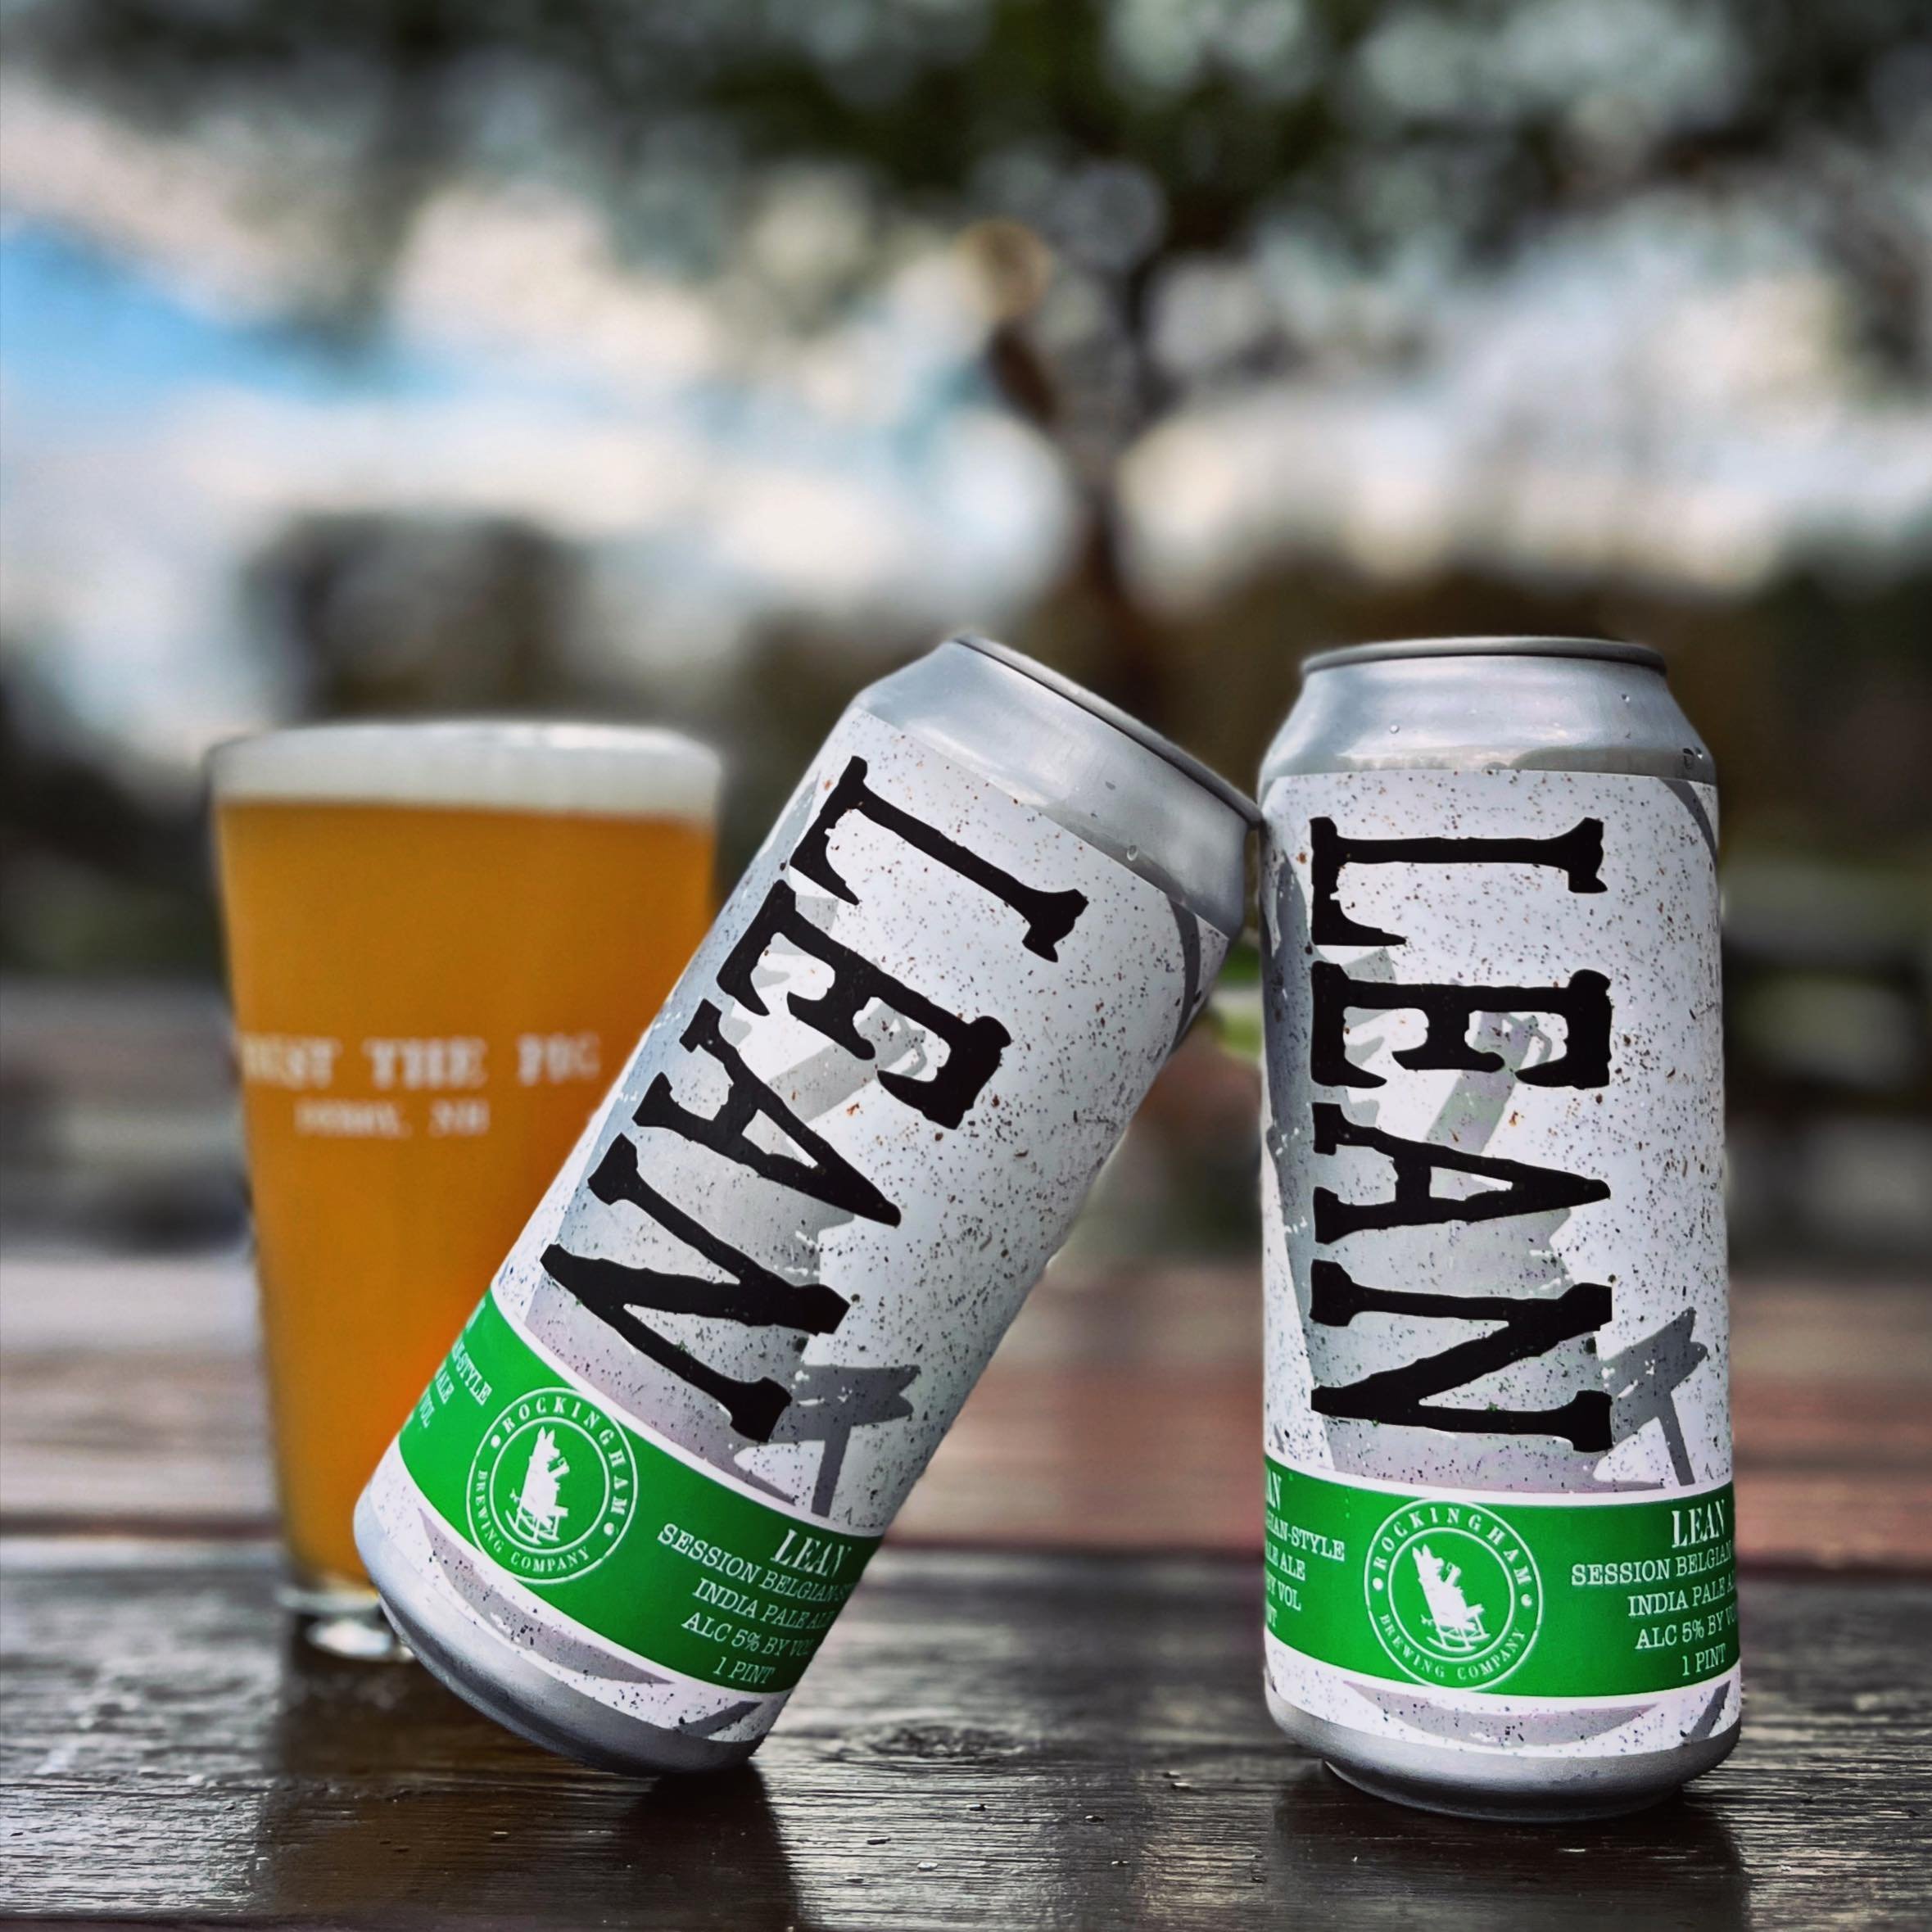 You could say we&rsquo;re really LEANing into the weekend! Join us tonight for a pint of our light &amp; fruity Belgian IPA on the patio and stay for Birria tacos from our good friends @walkinggourmetnh &mdash; back for the first time this season! Op